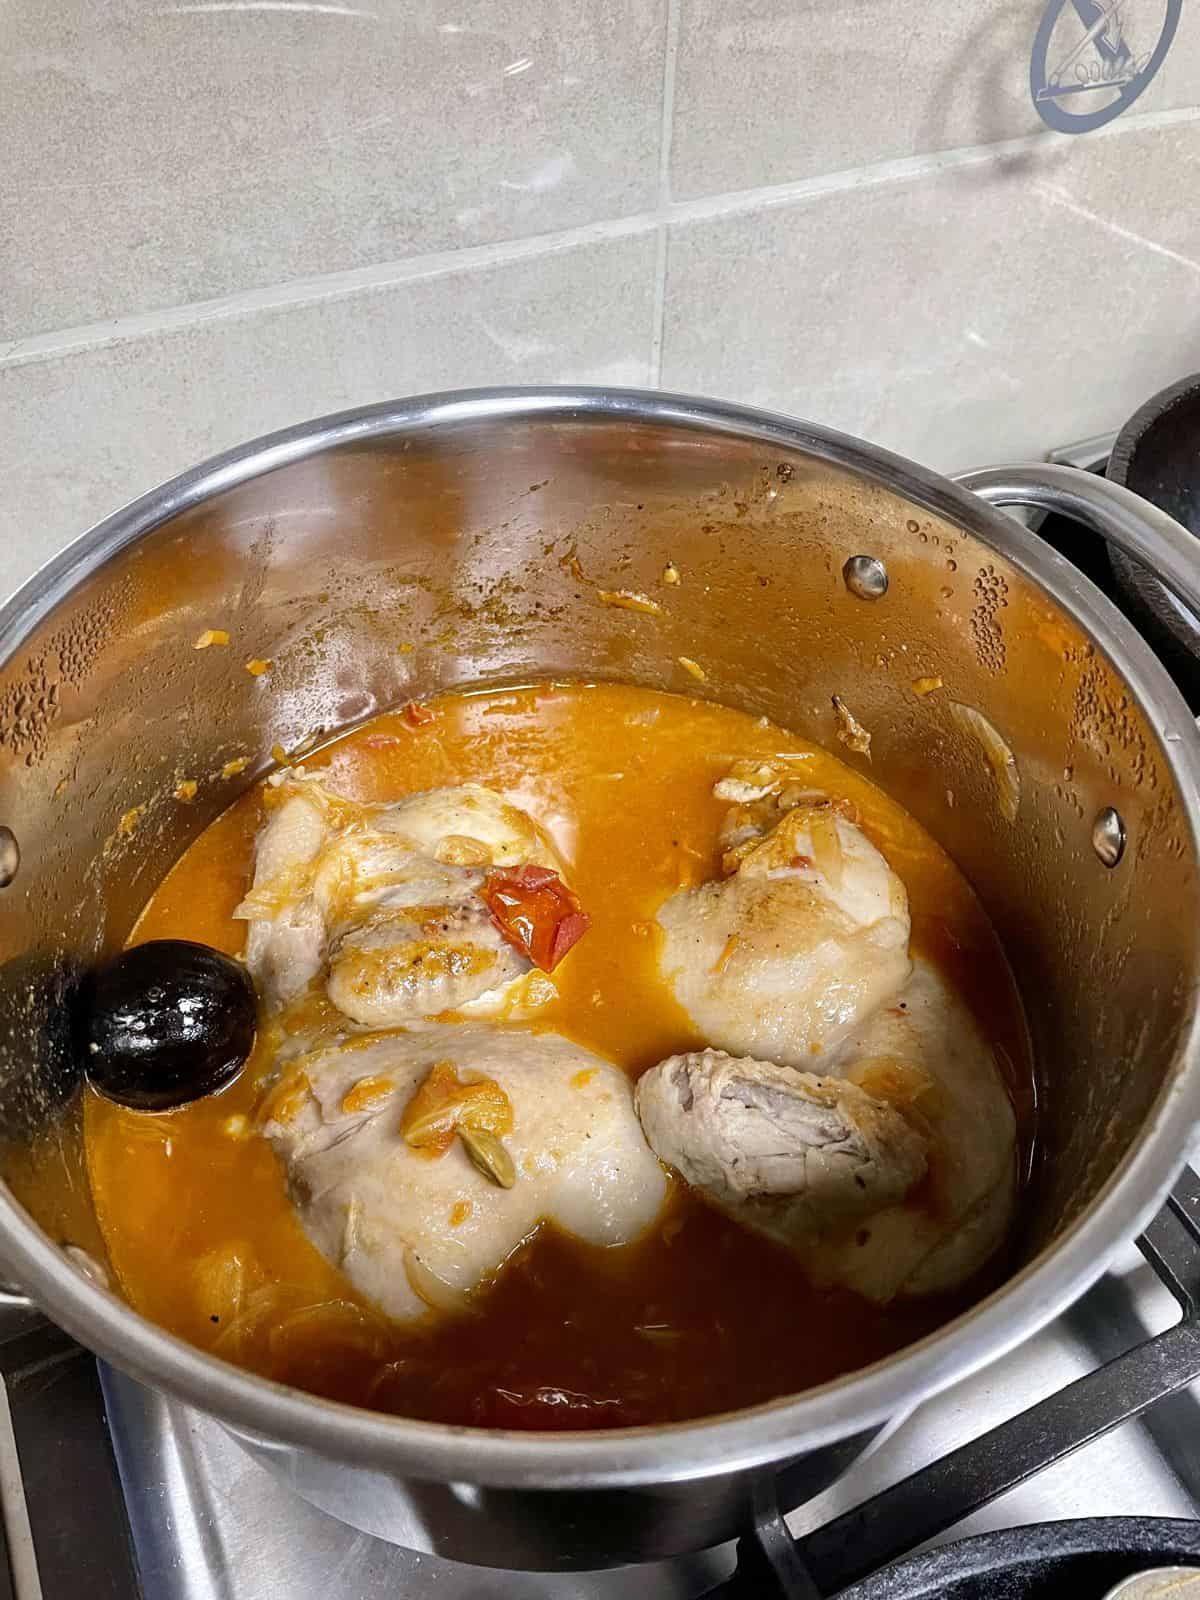 Boiling halved chicken in kabsa broth.